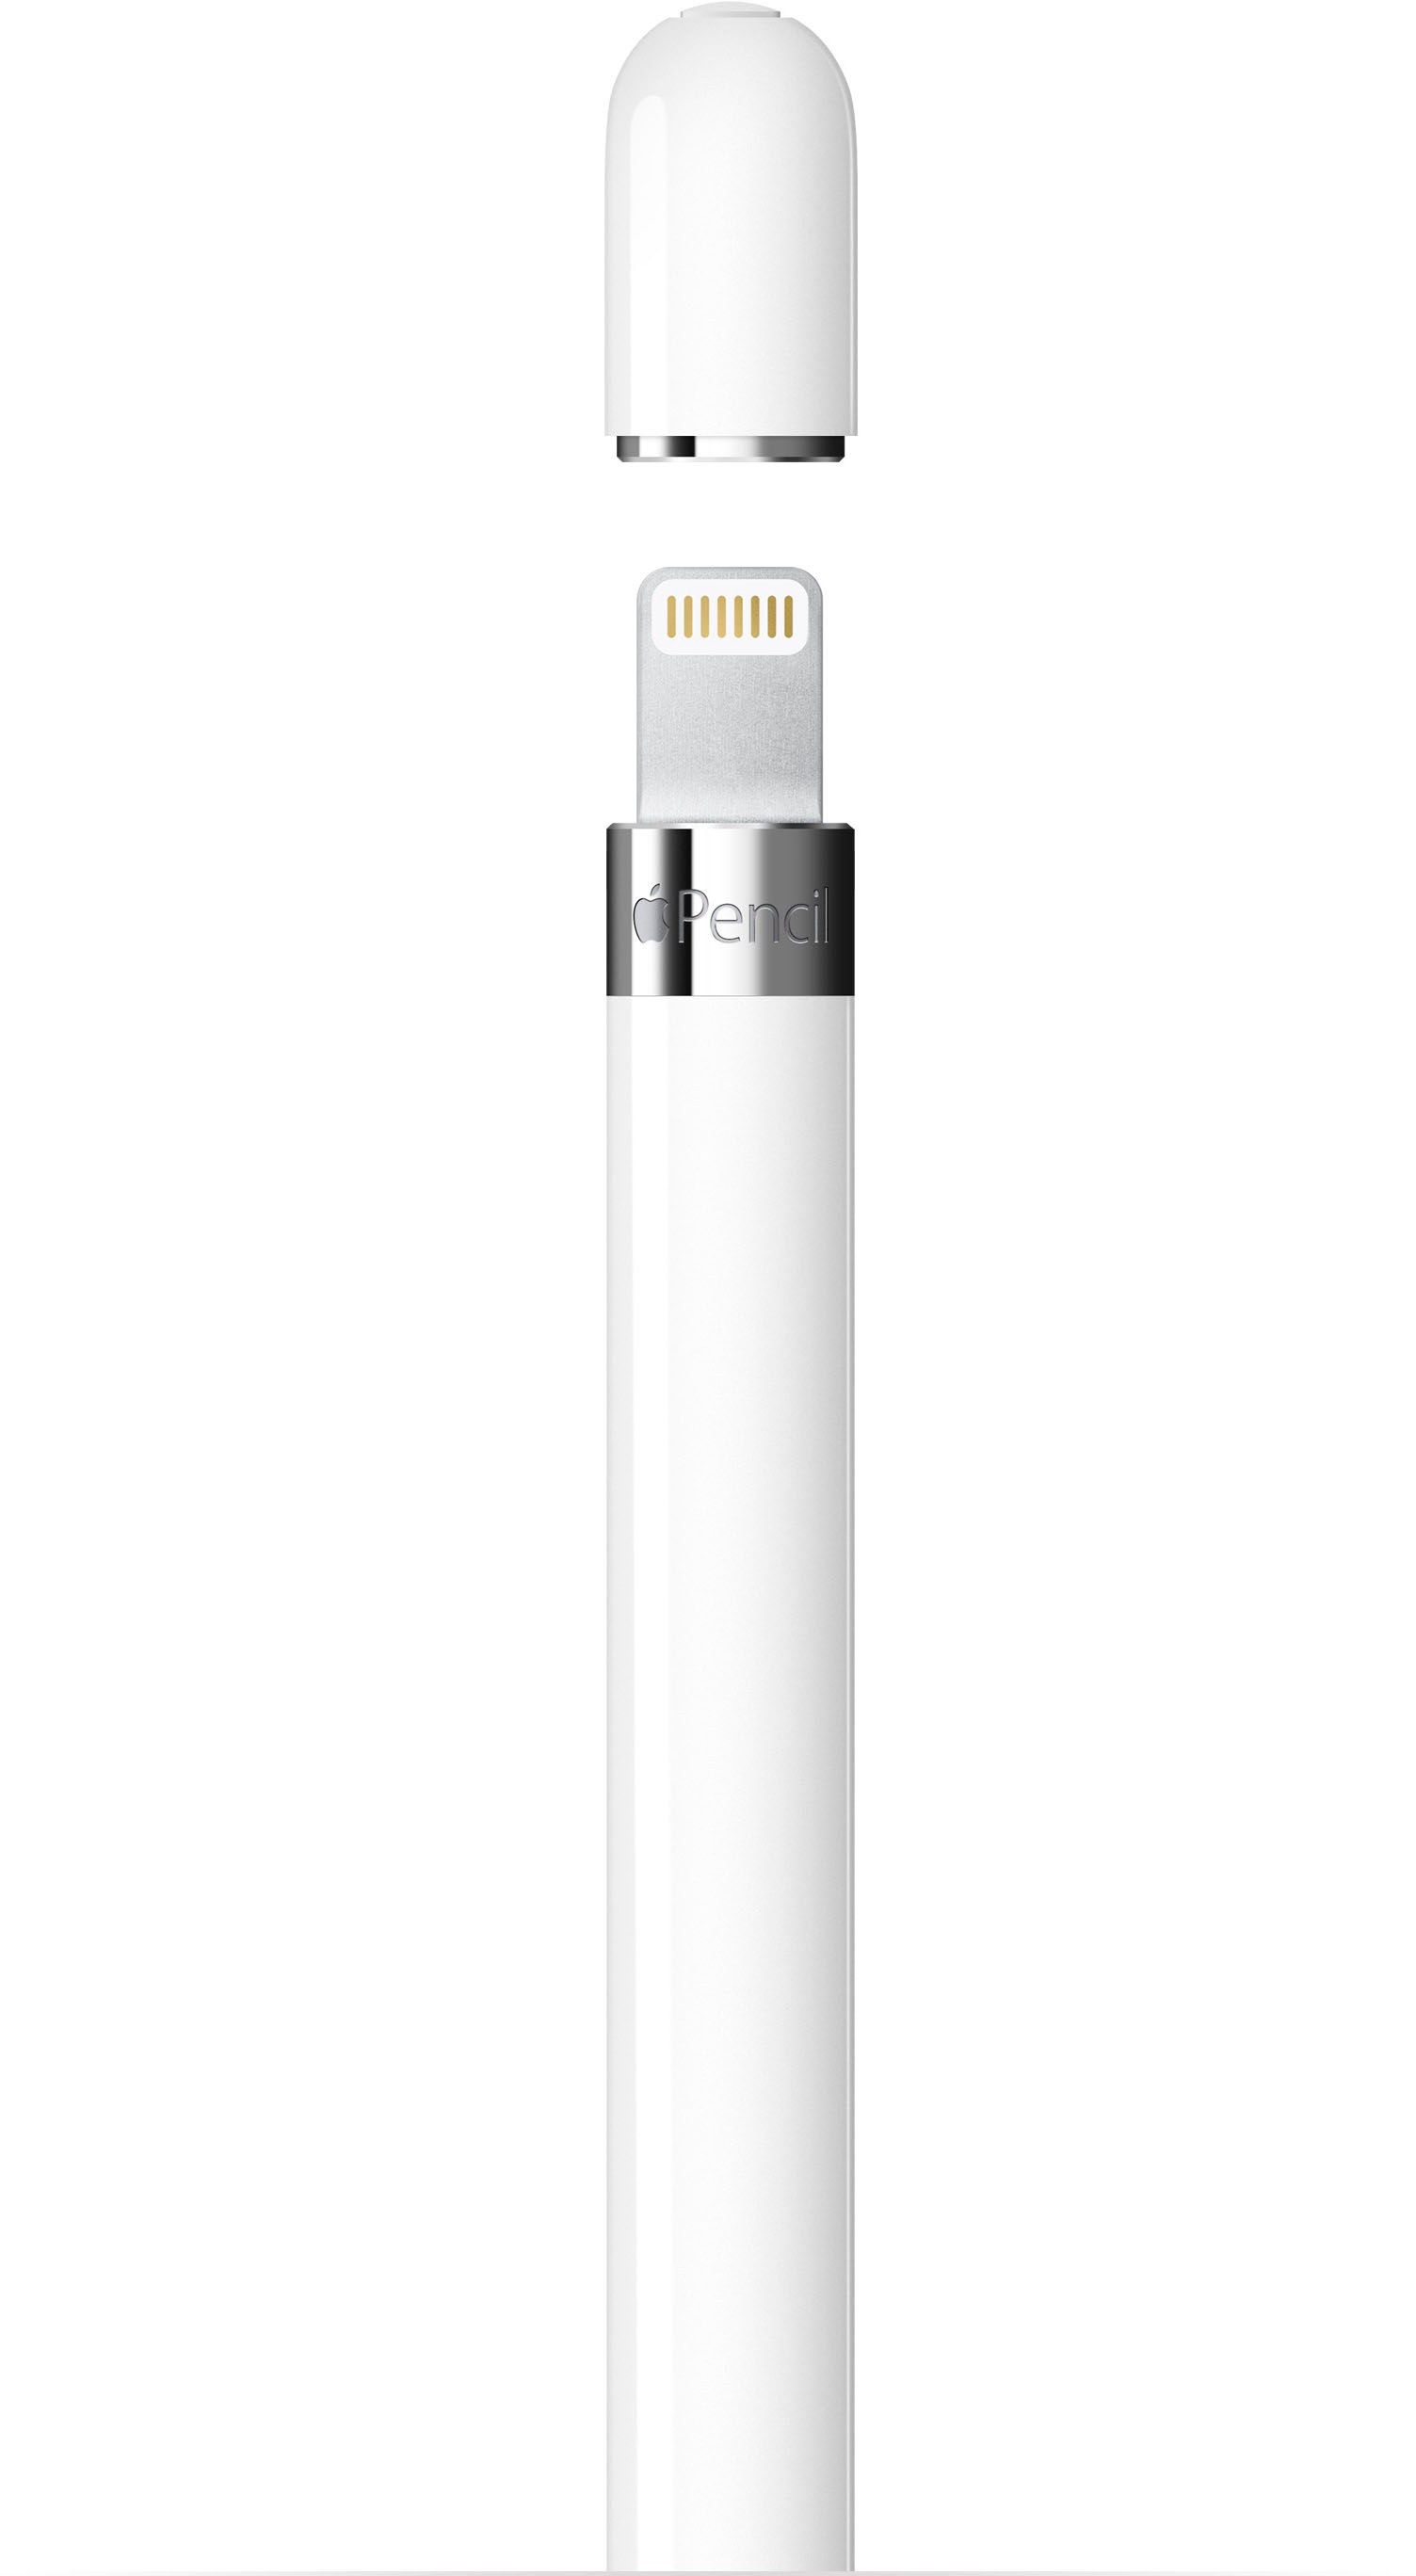 Apple Pencil (1st Generation with USB-C Adapter)